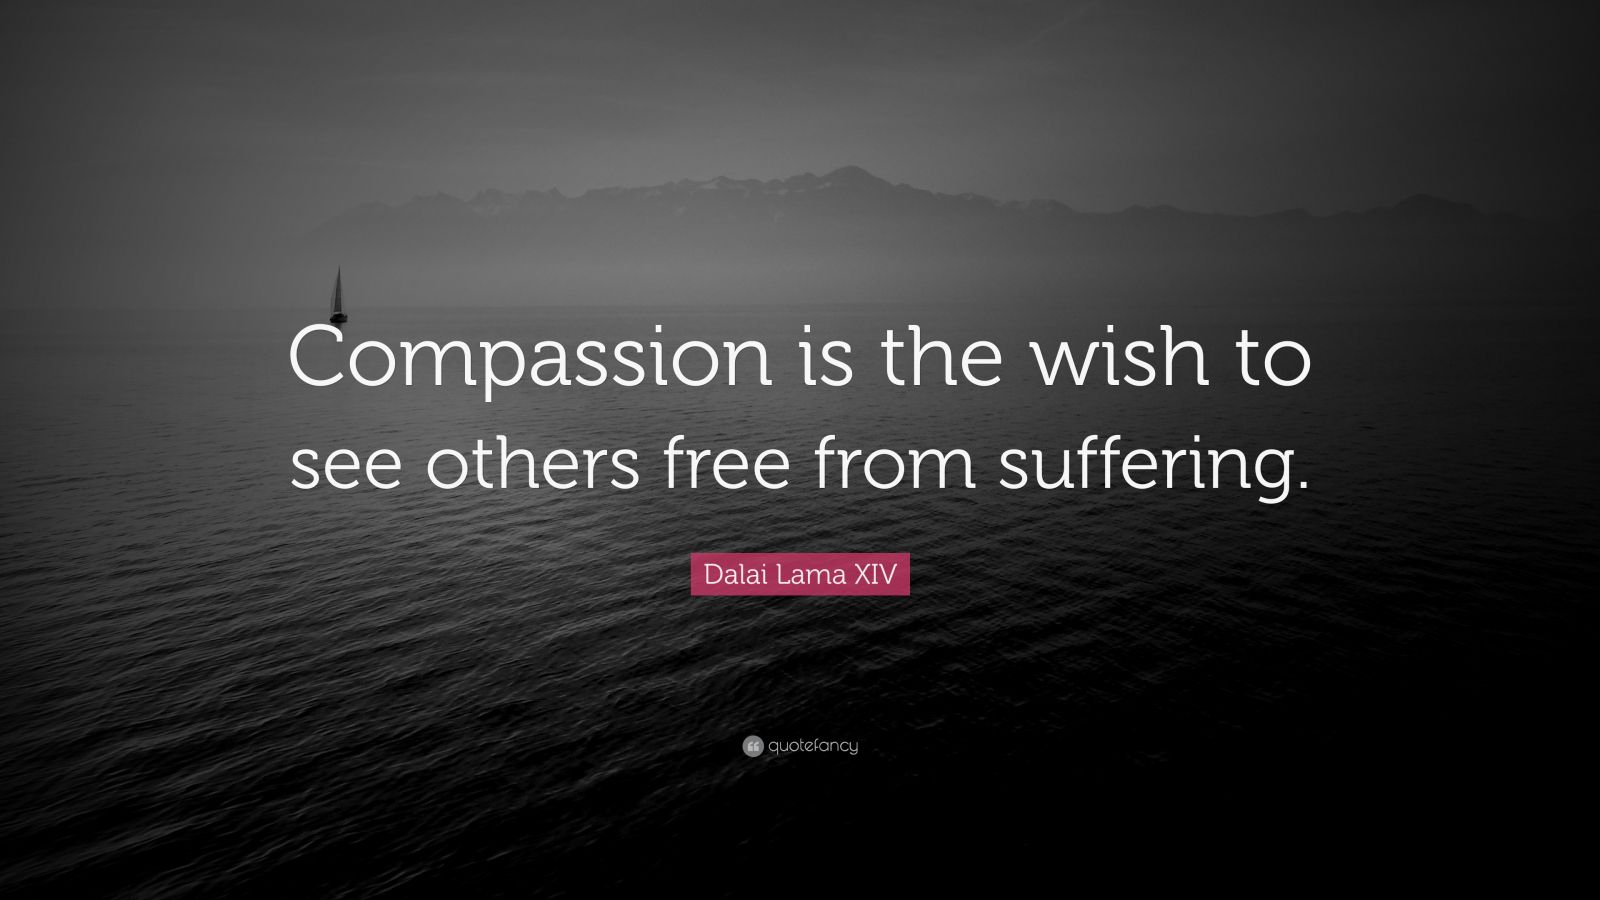 Dalai Lama XIV Quote: “Compassion is the wish to see others free from ...